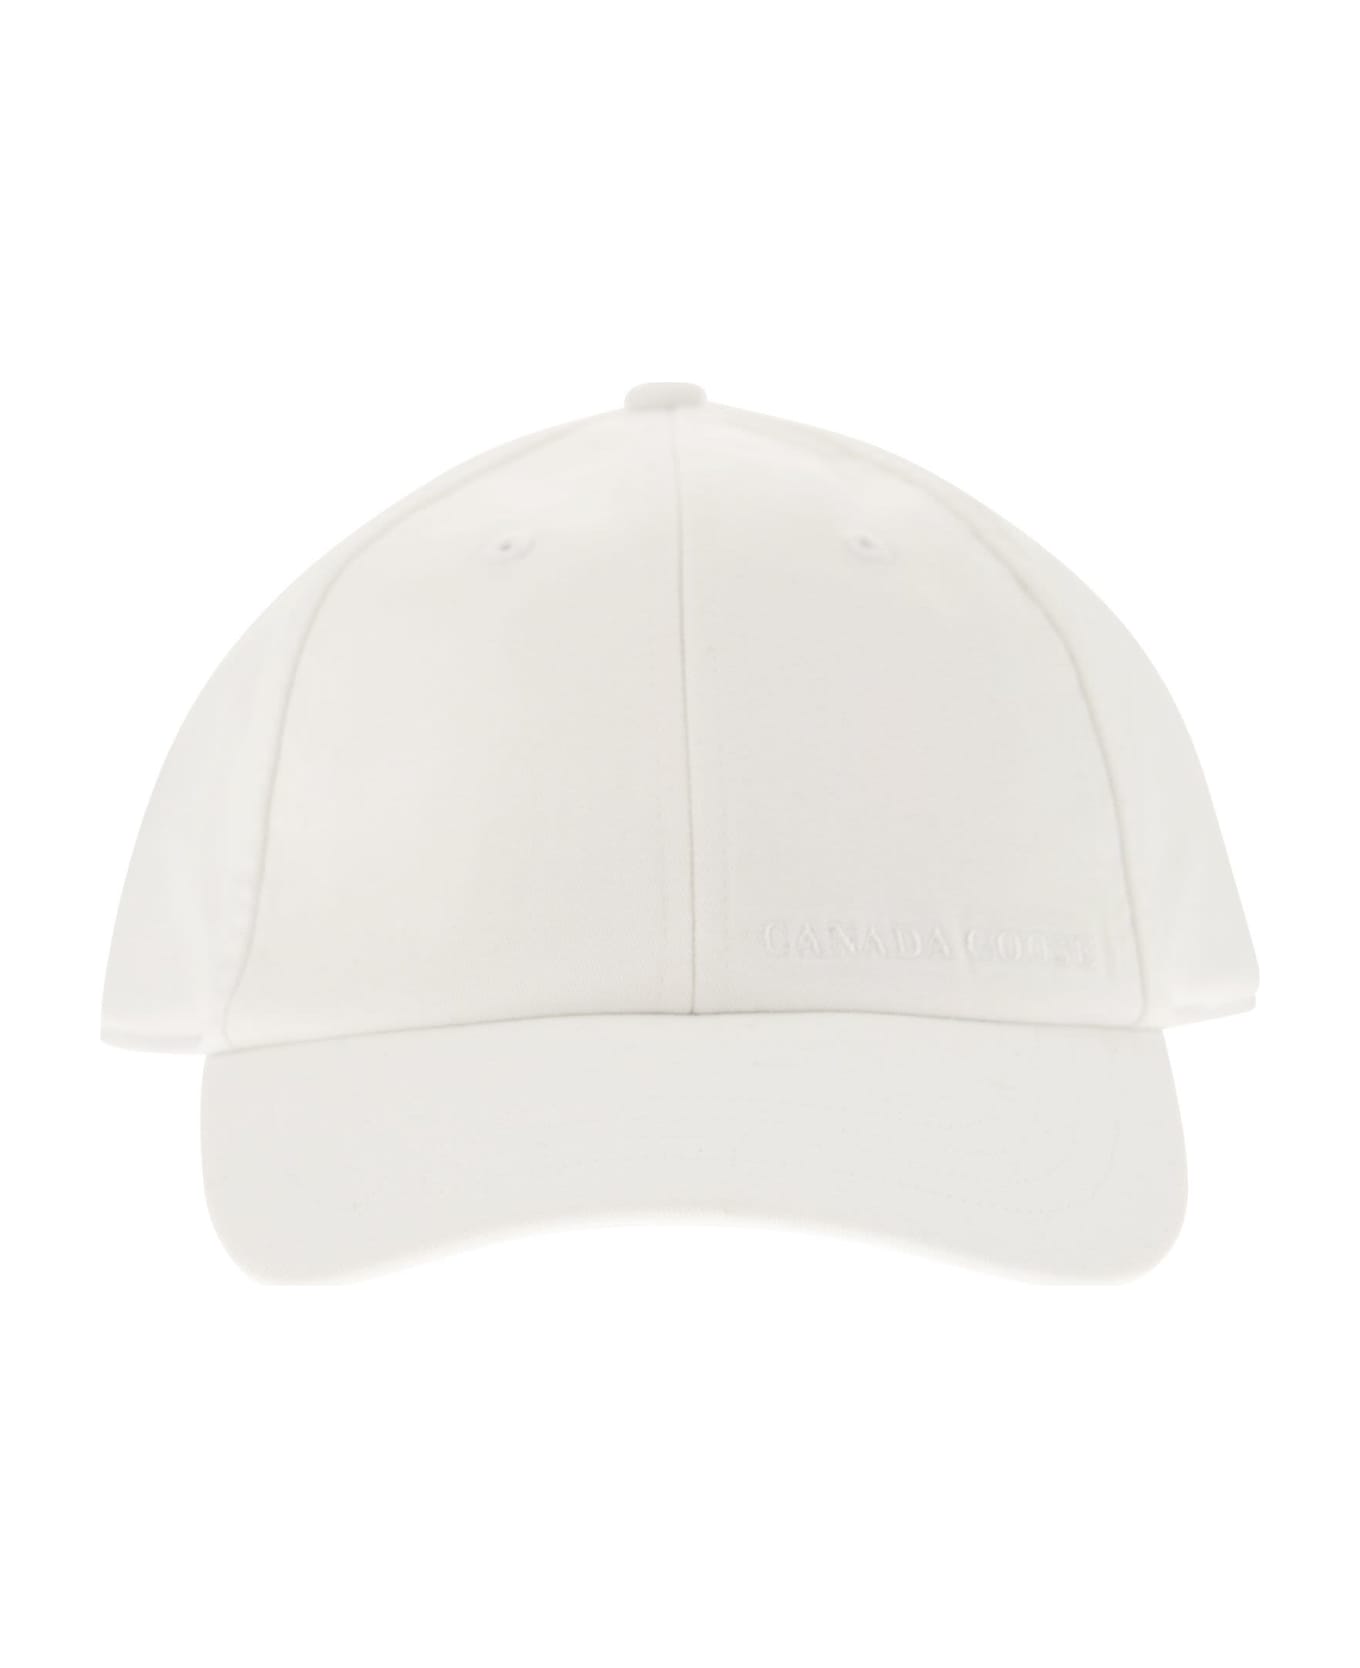 Canada Goose Hat With Visor - White